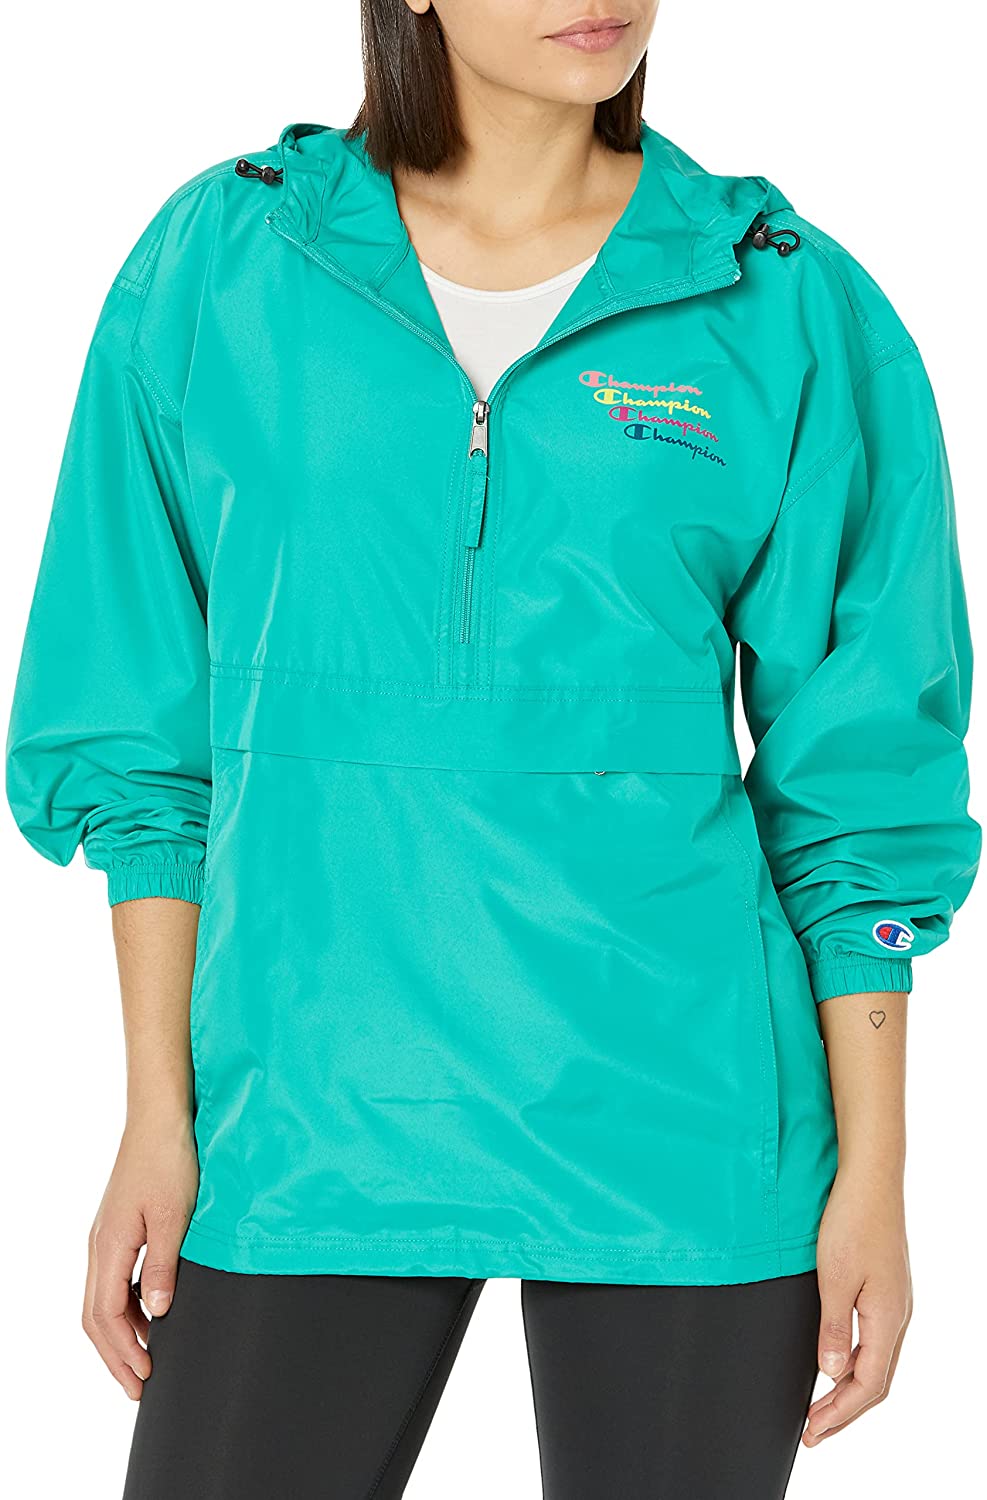 walking country outdoor 2 colour options Ladies Champion Mayfield Jacket 